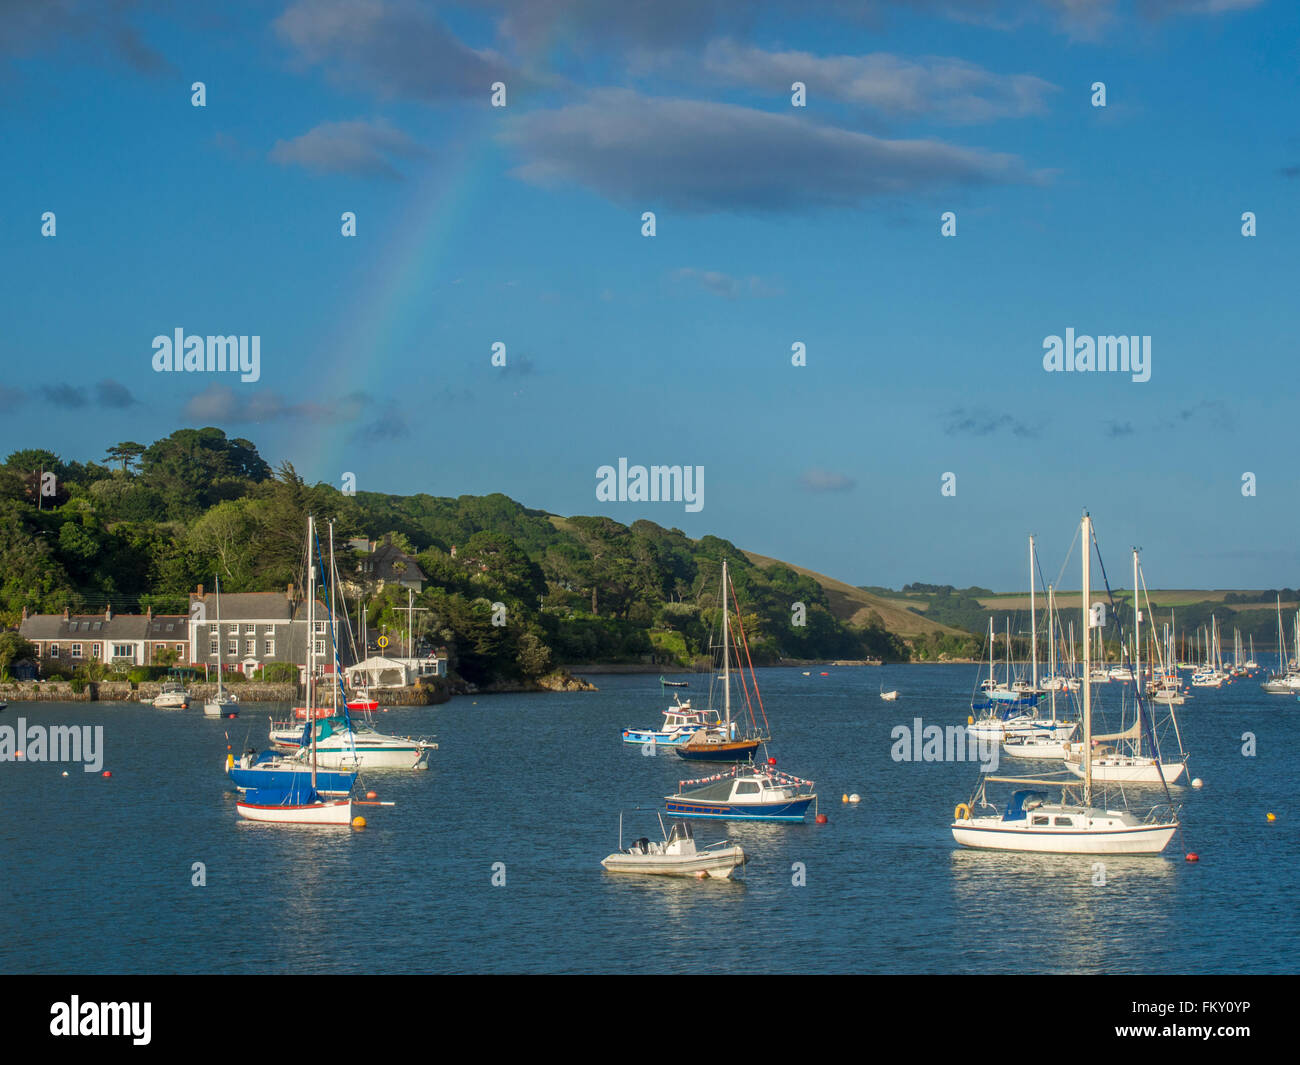 A tranquil harbour scene at Falmouth, England, showing village of Flushing and sailing boats. A faint rainbow in the sky. Stock Photo